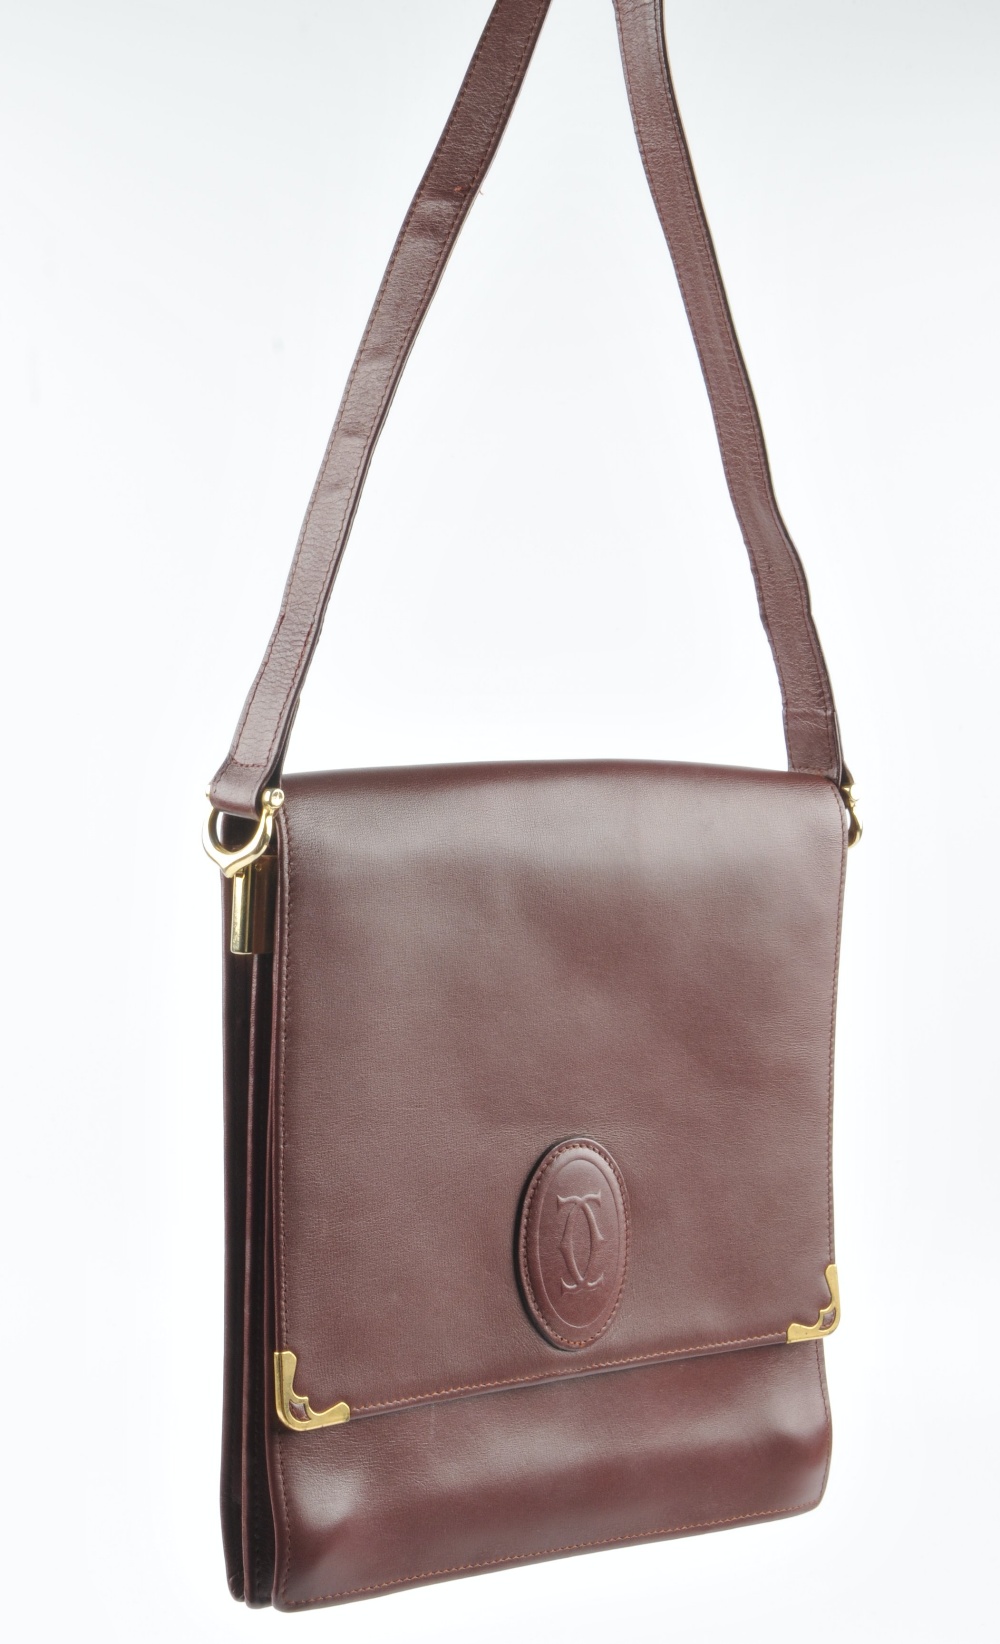 CARTIER - a Bordeaux leather handbag. Featuring a top flap closure with maker's embossed logo emblem - Image 3 of 5